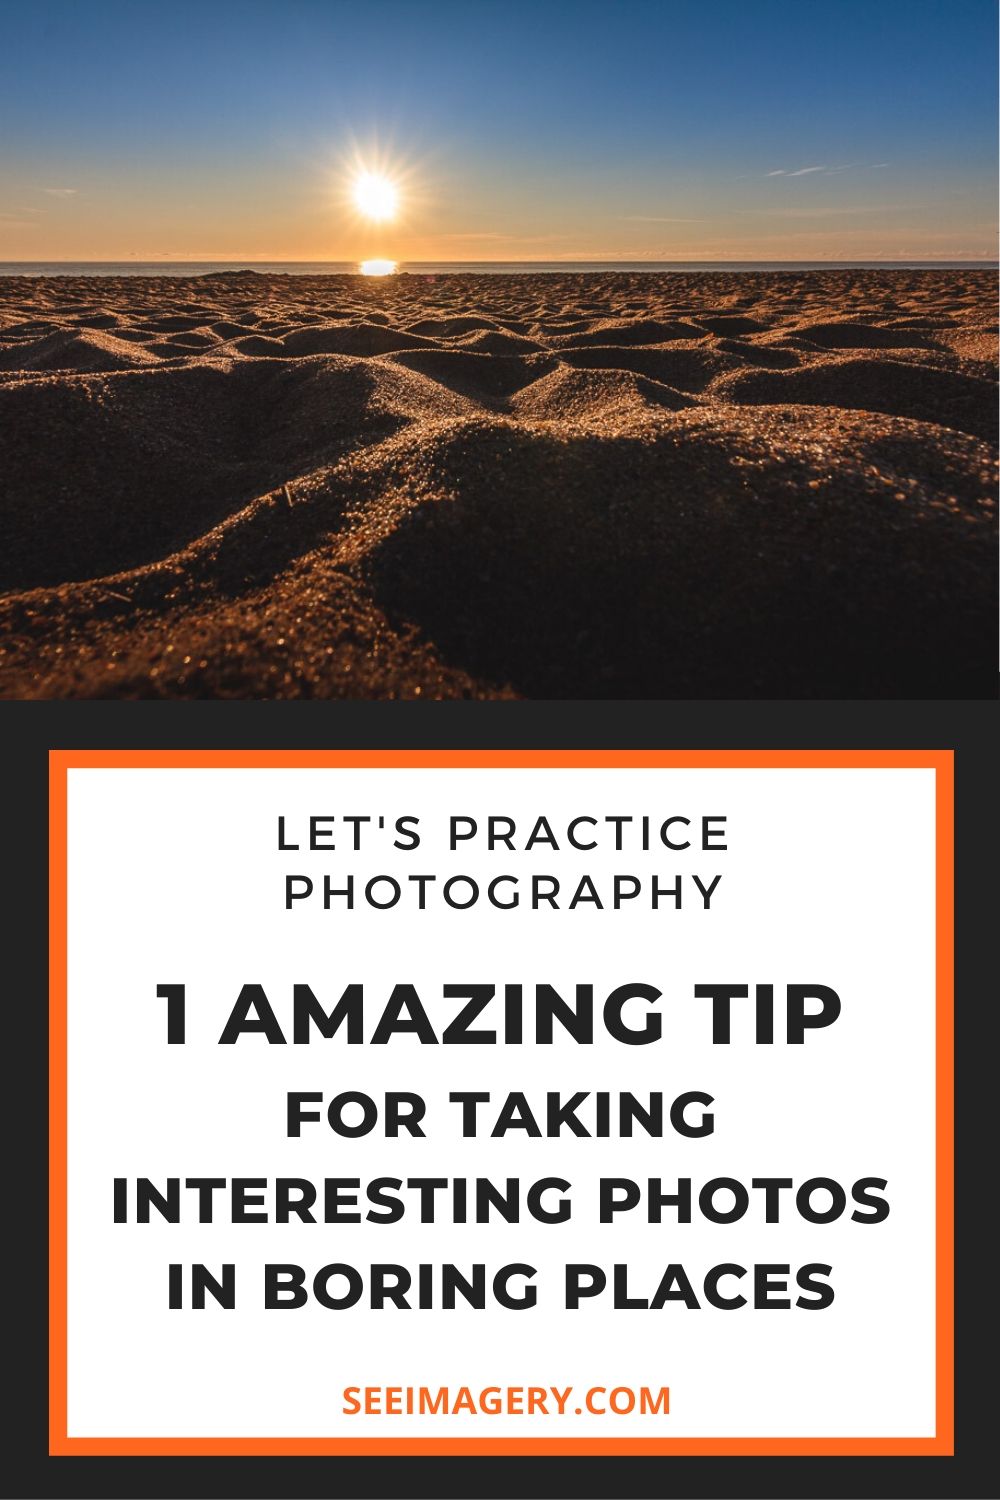 change your perspective - photography tip